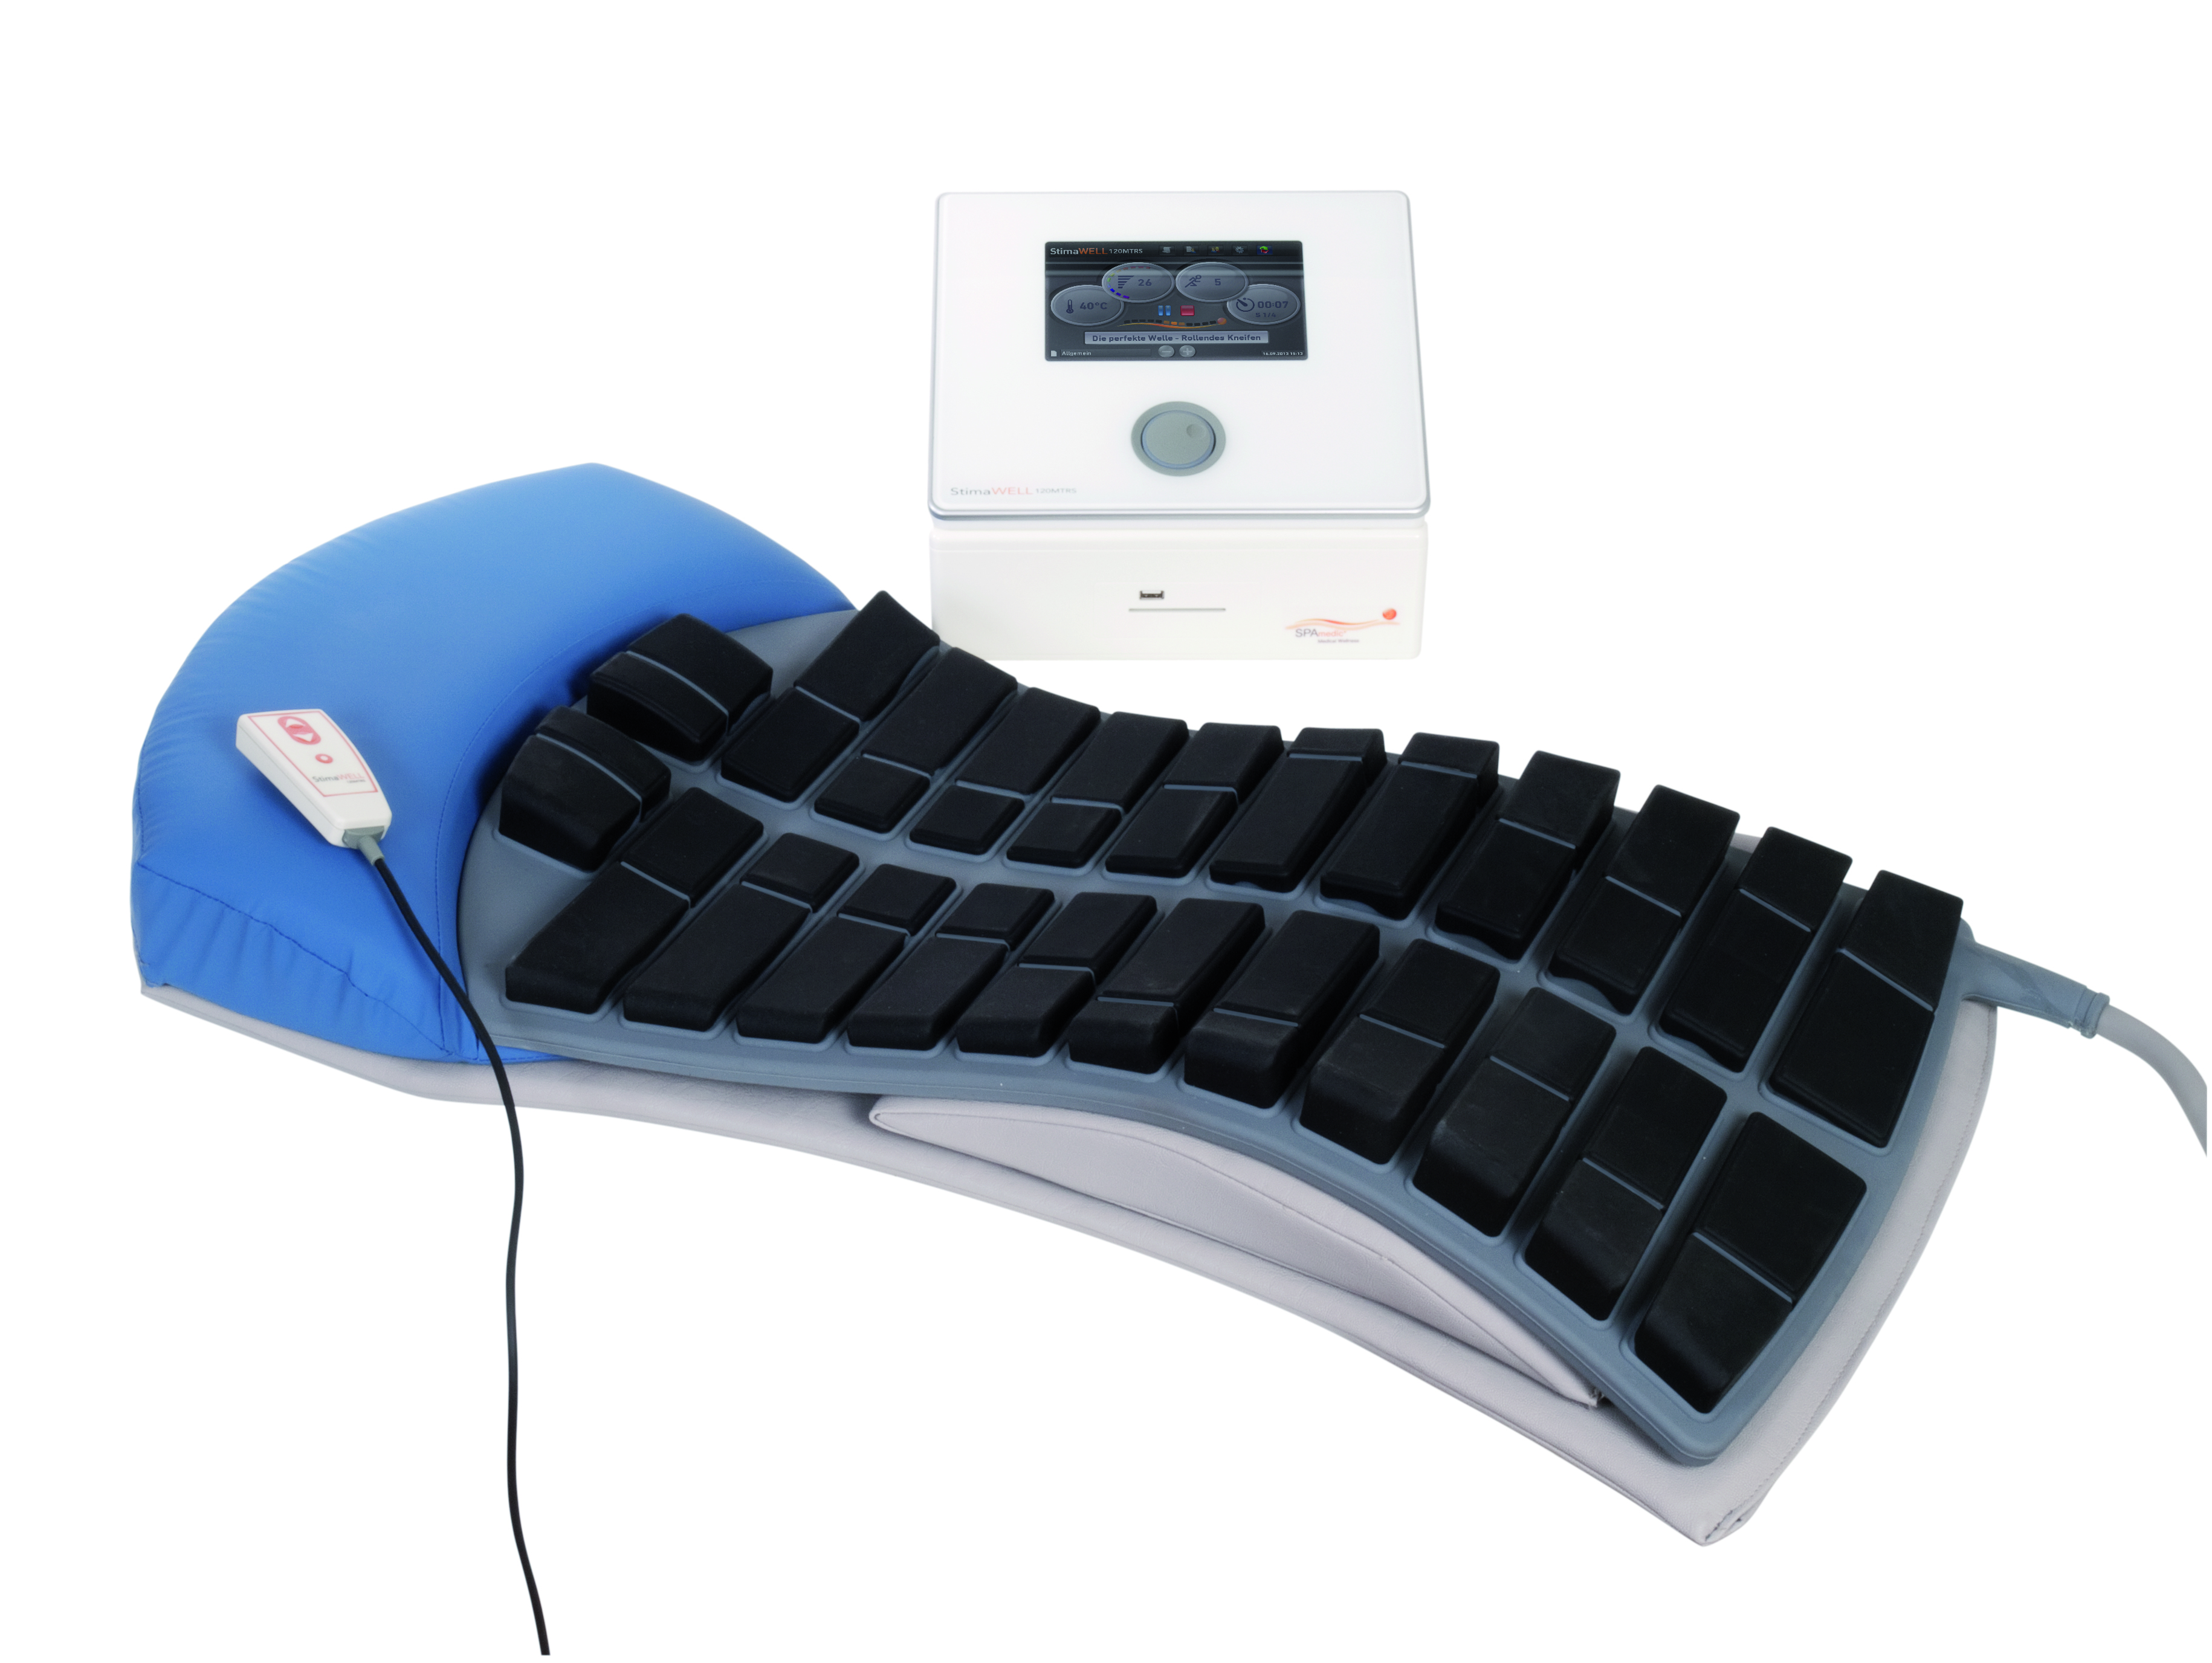 Electrotherapy - Wikipedia